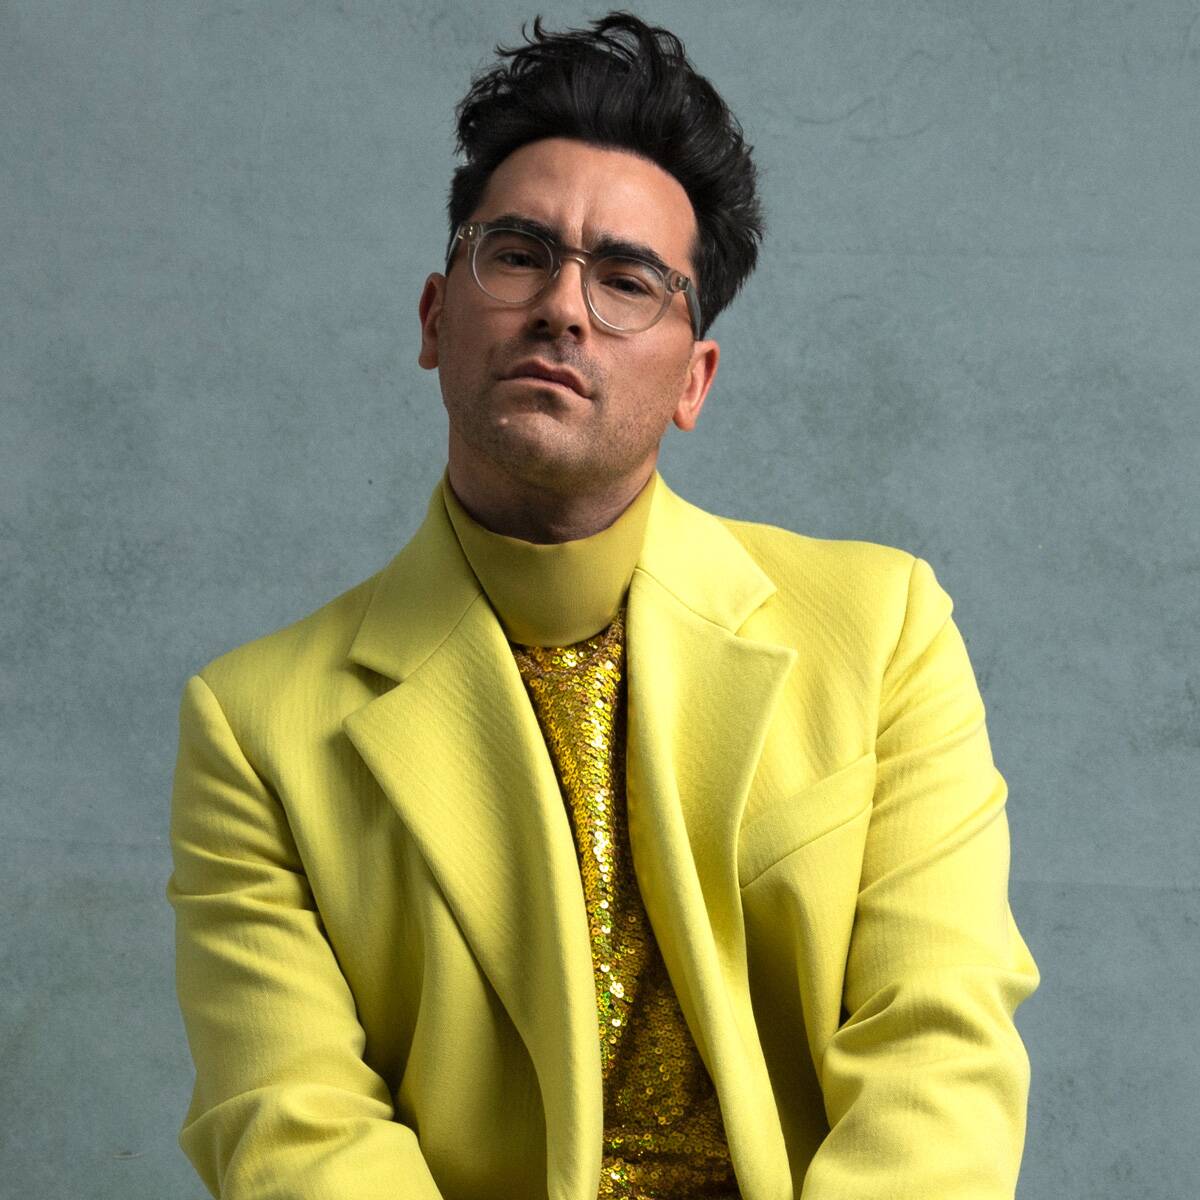 Dan Levy, Cynthia Erivo and More Light Up the 2021 Golden Globes With Electrifying Neon Looks